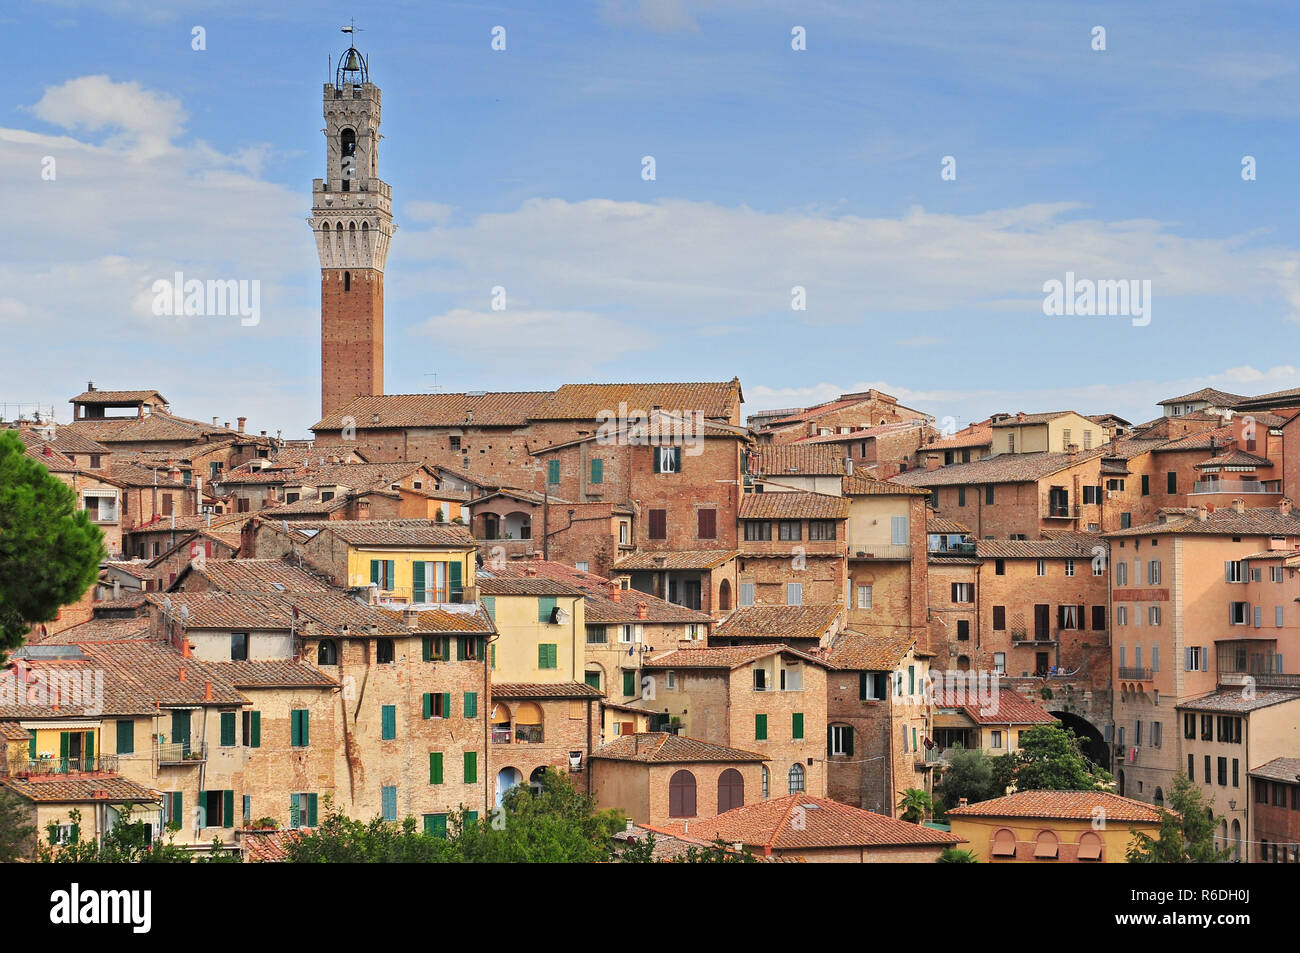 View Over The Old Town Towards The Torre Del Mangia On The Palazzo Publico, Siena, Tuscany, Italy Stock Photo